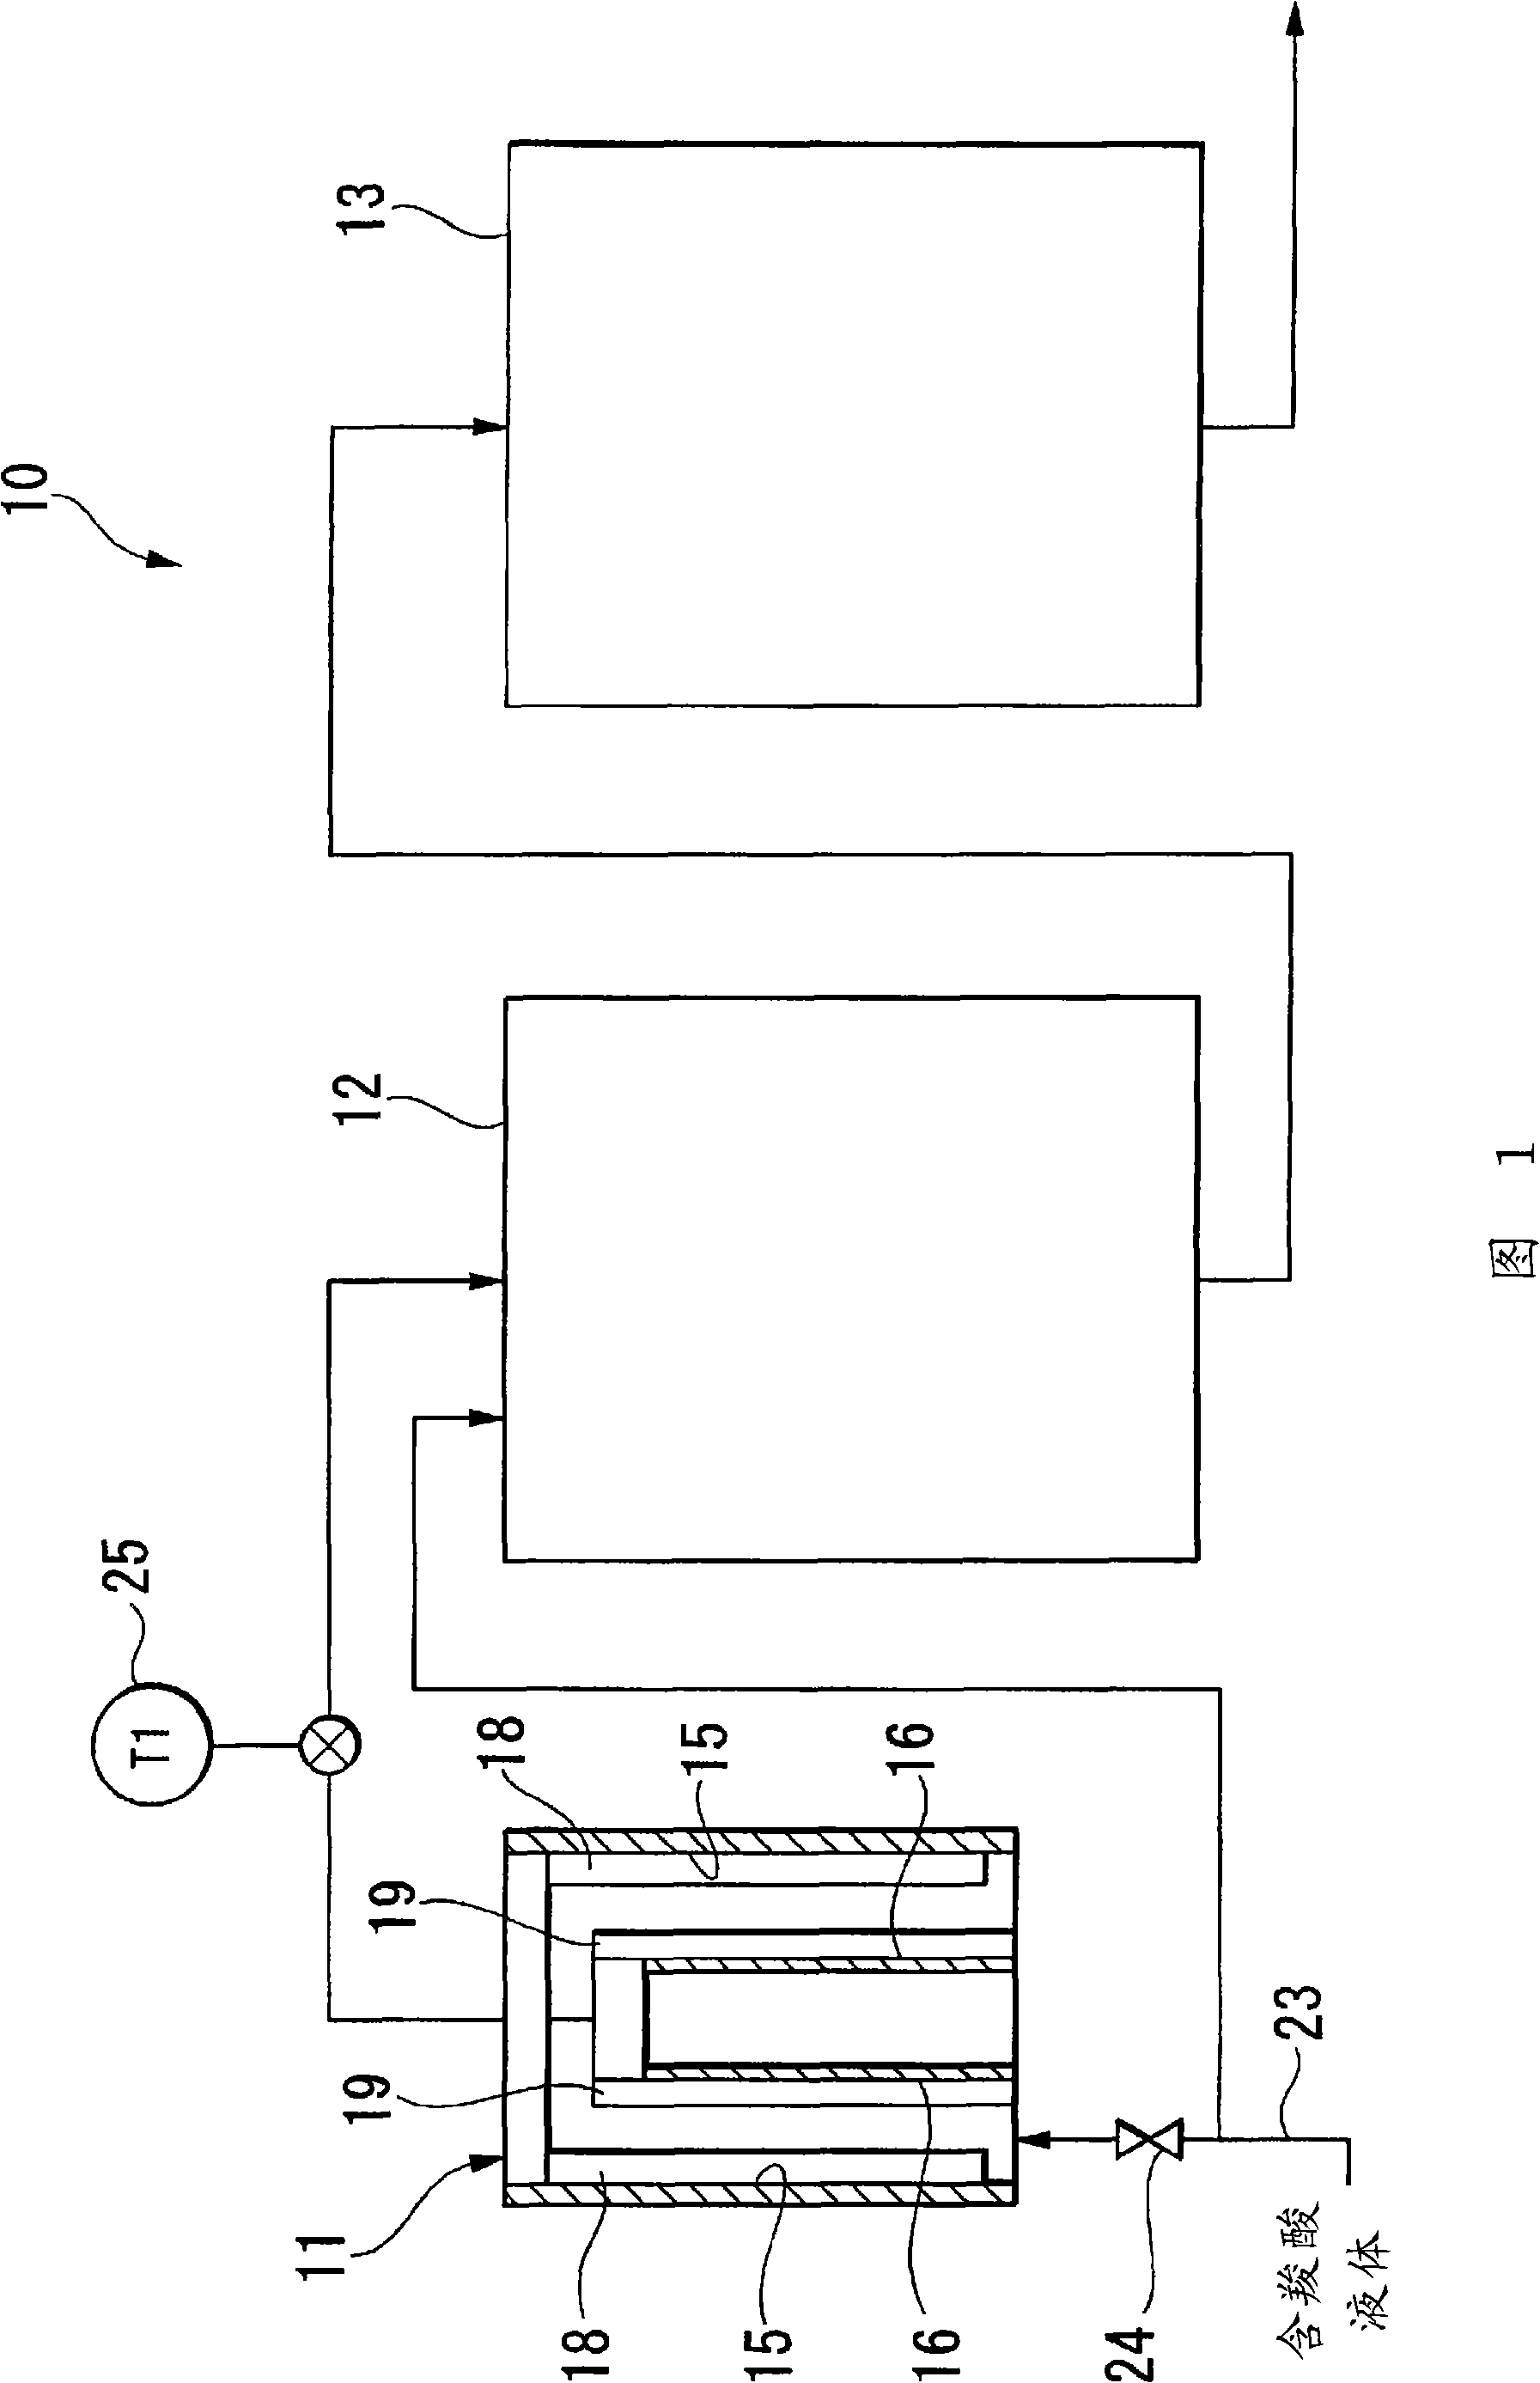 Process for producing carboxylic acid